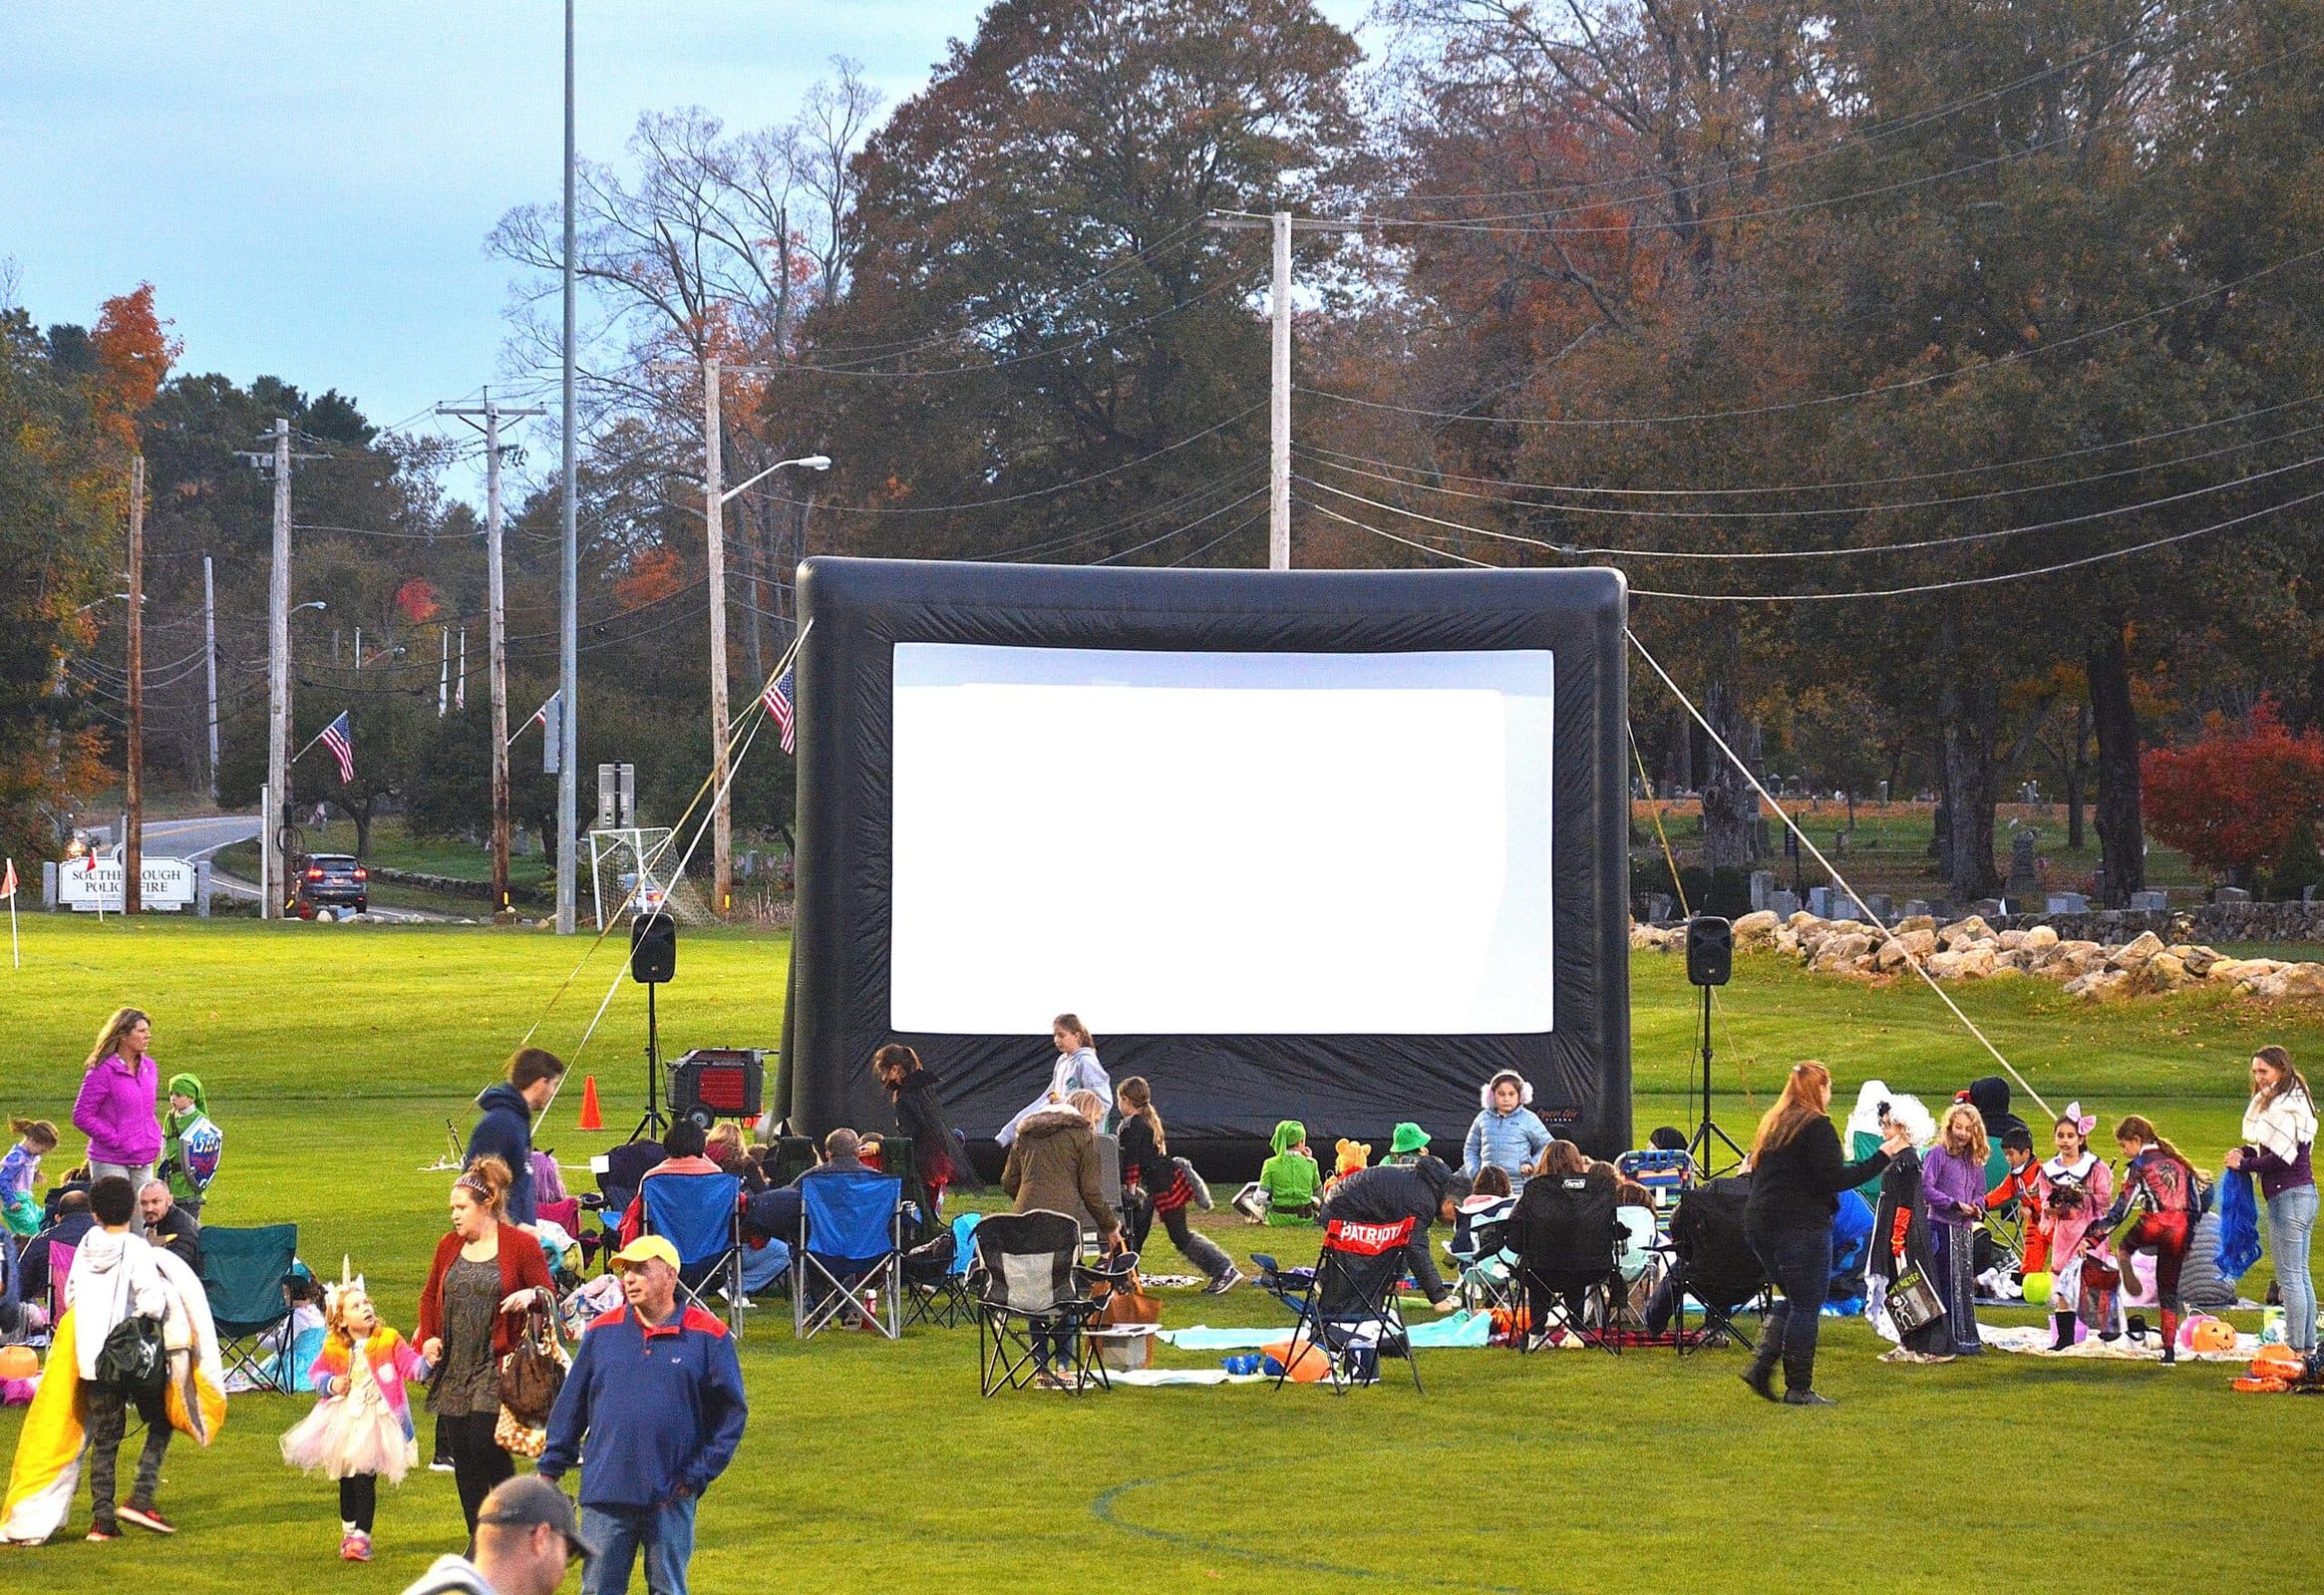 Nearing dusk, trunk-or-treaters await the outdoor screening of the animated comedy film “Monsters, Inc.” on the lawn of Woodward School. (Photo/Ed Karvoski Jr.)